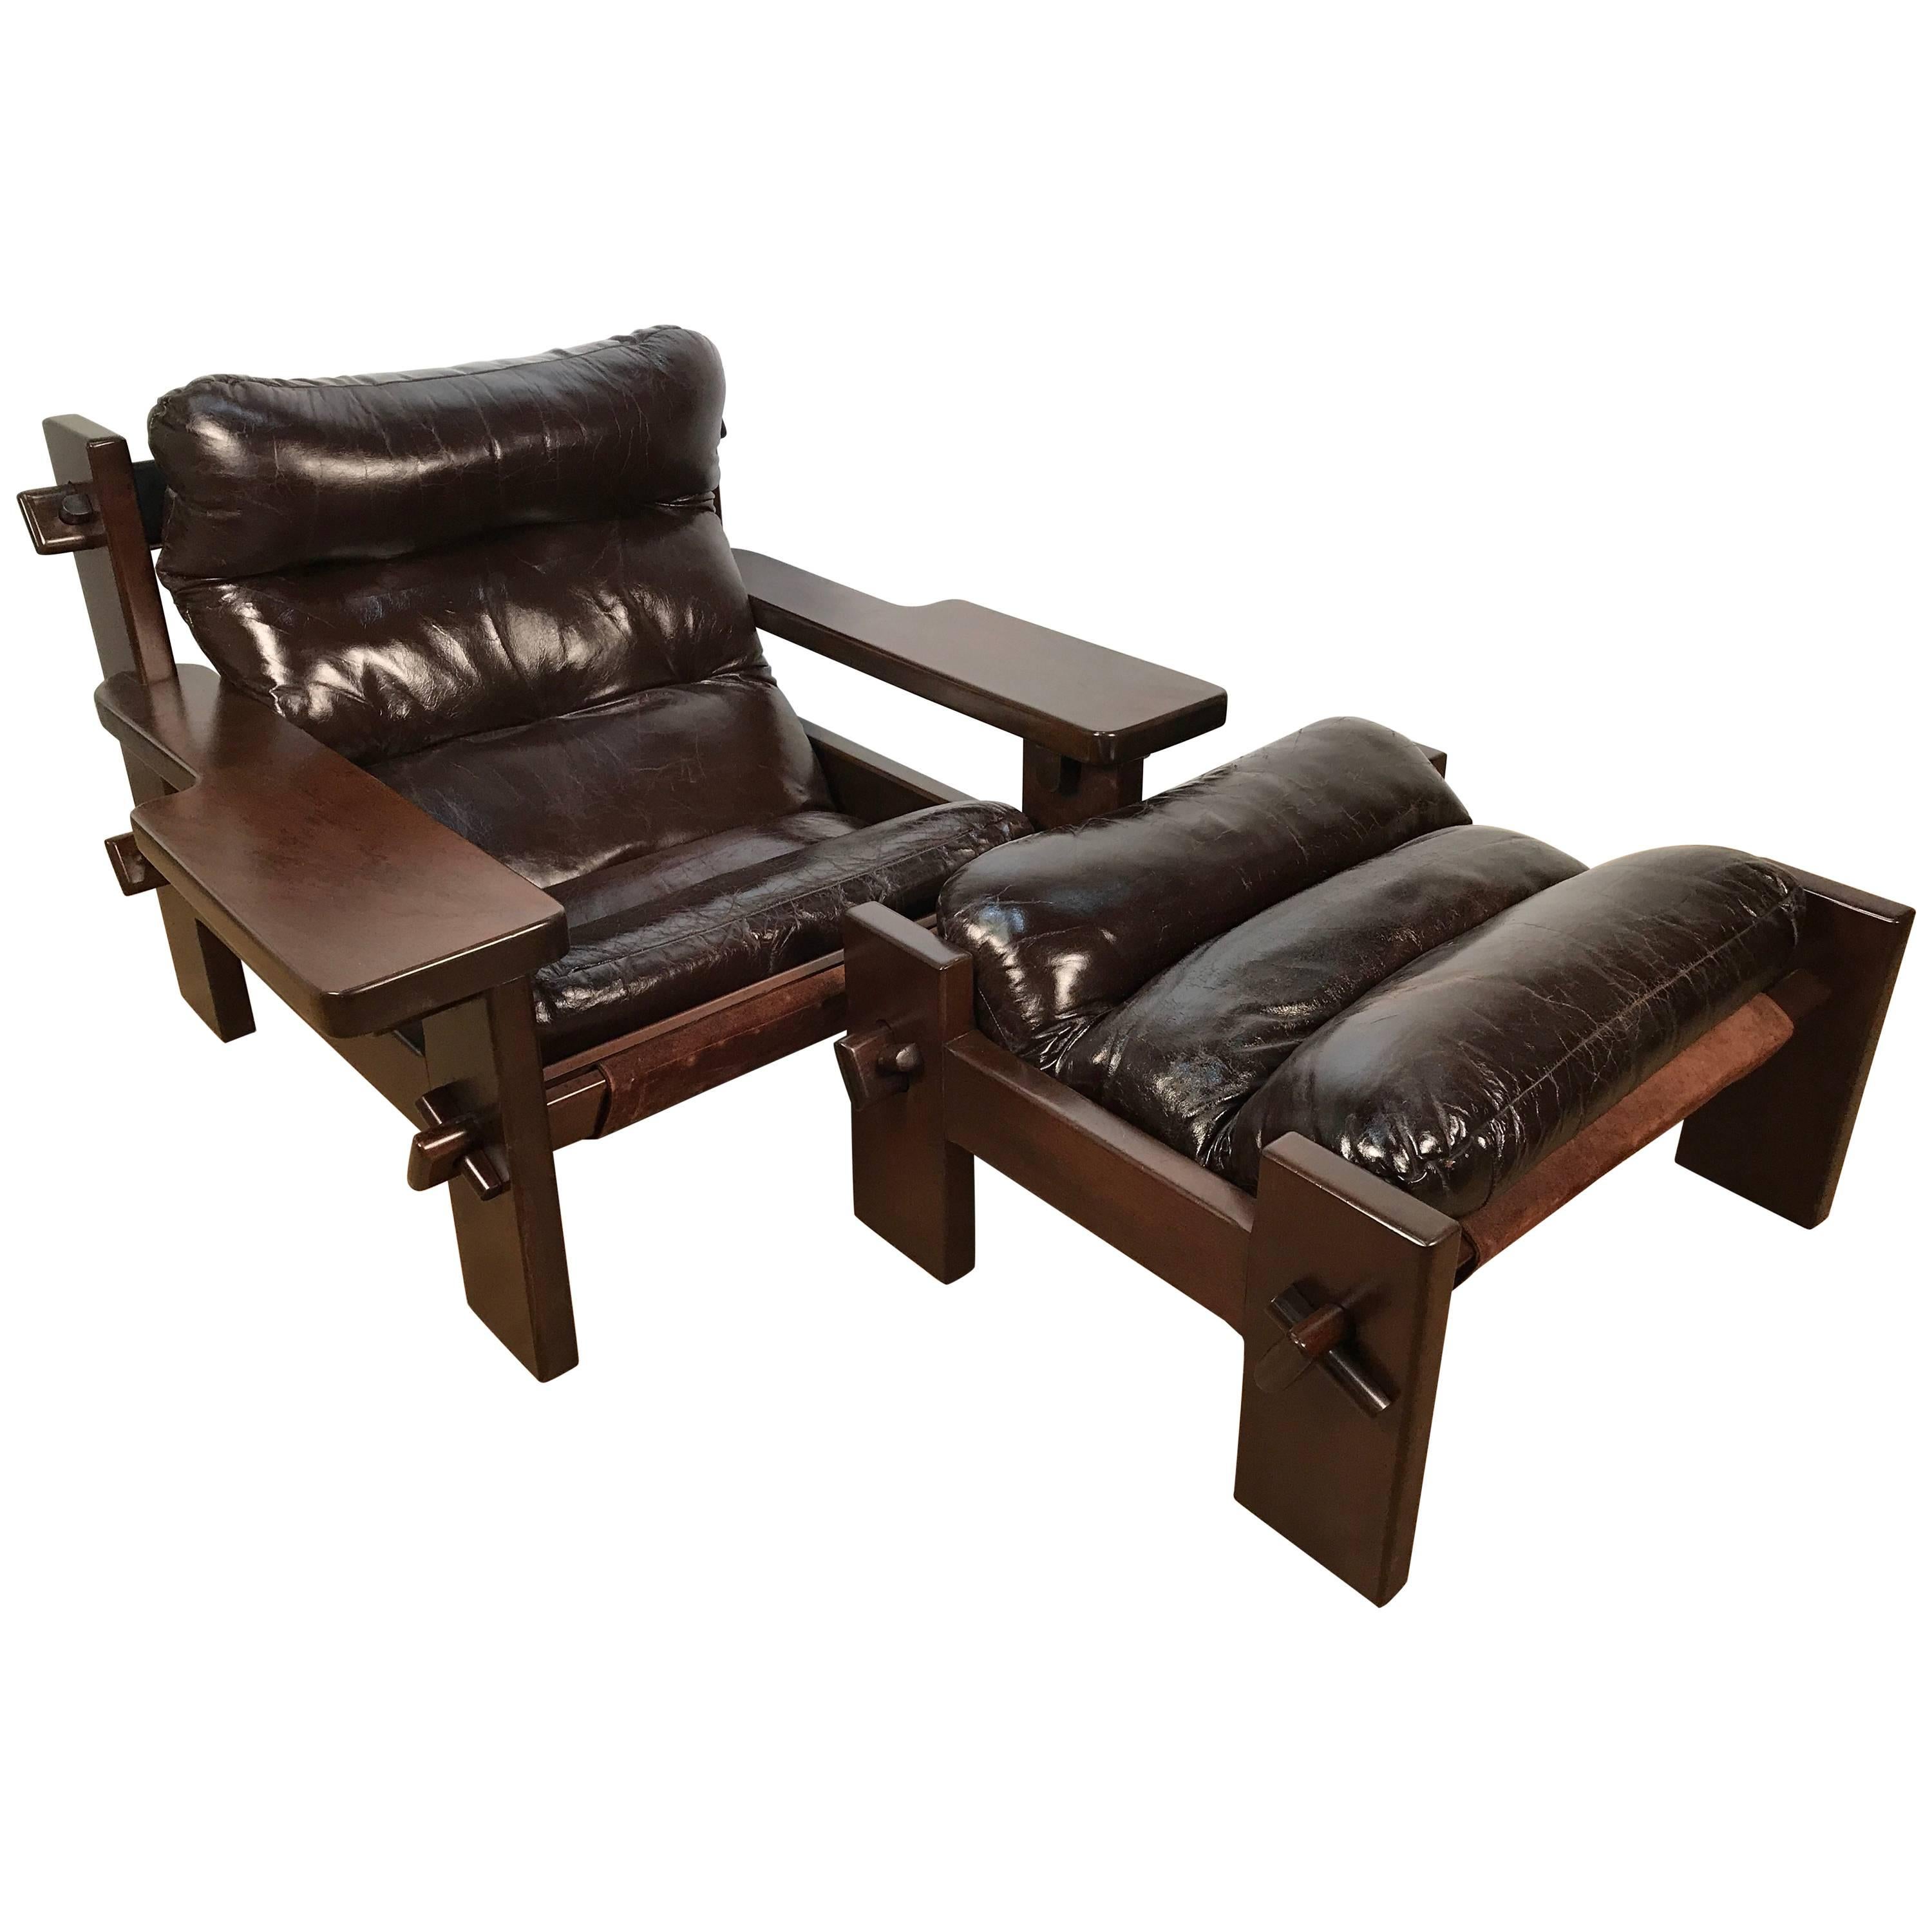 Large-Scale Jean Gillon Chair and Ottoman